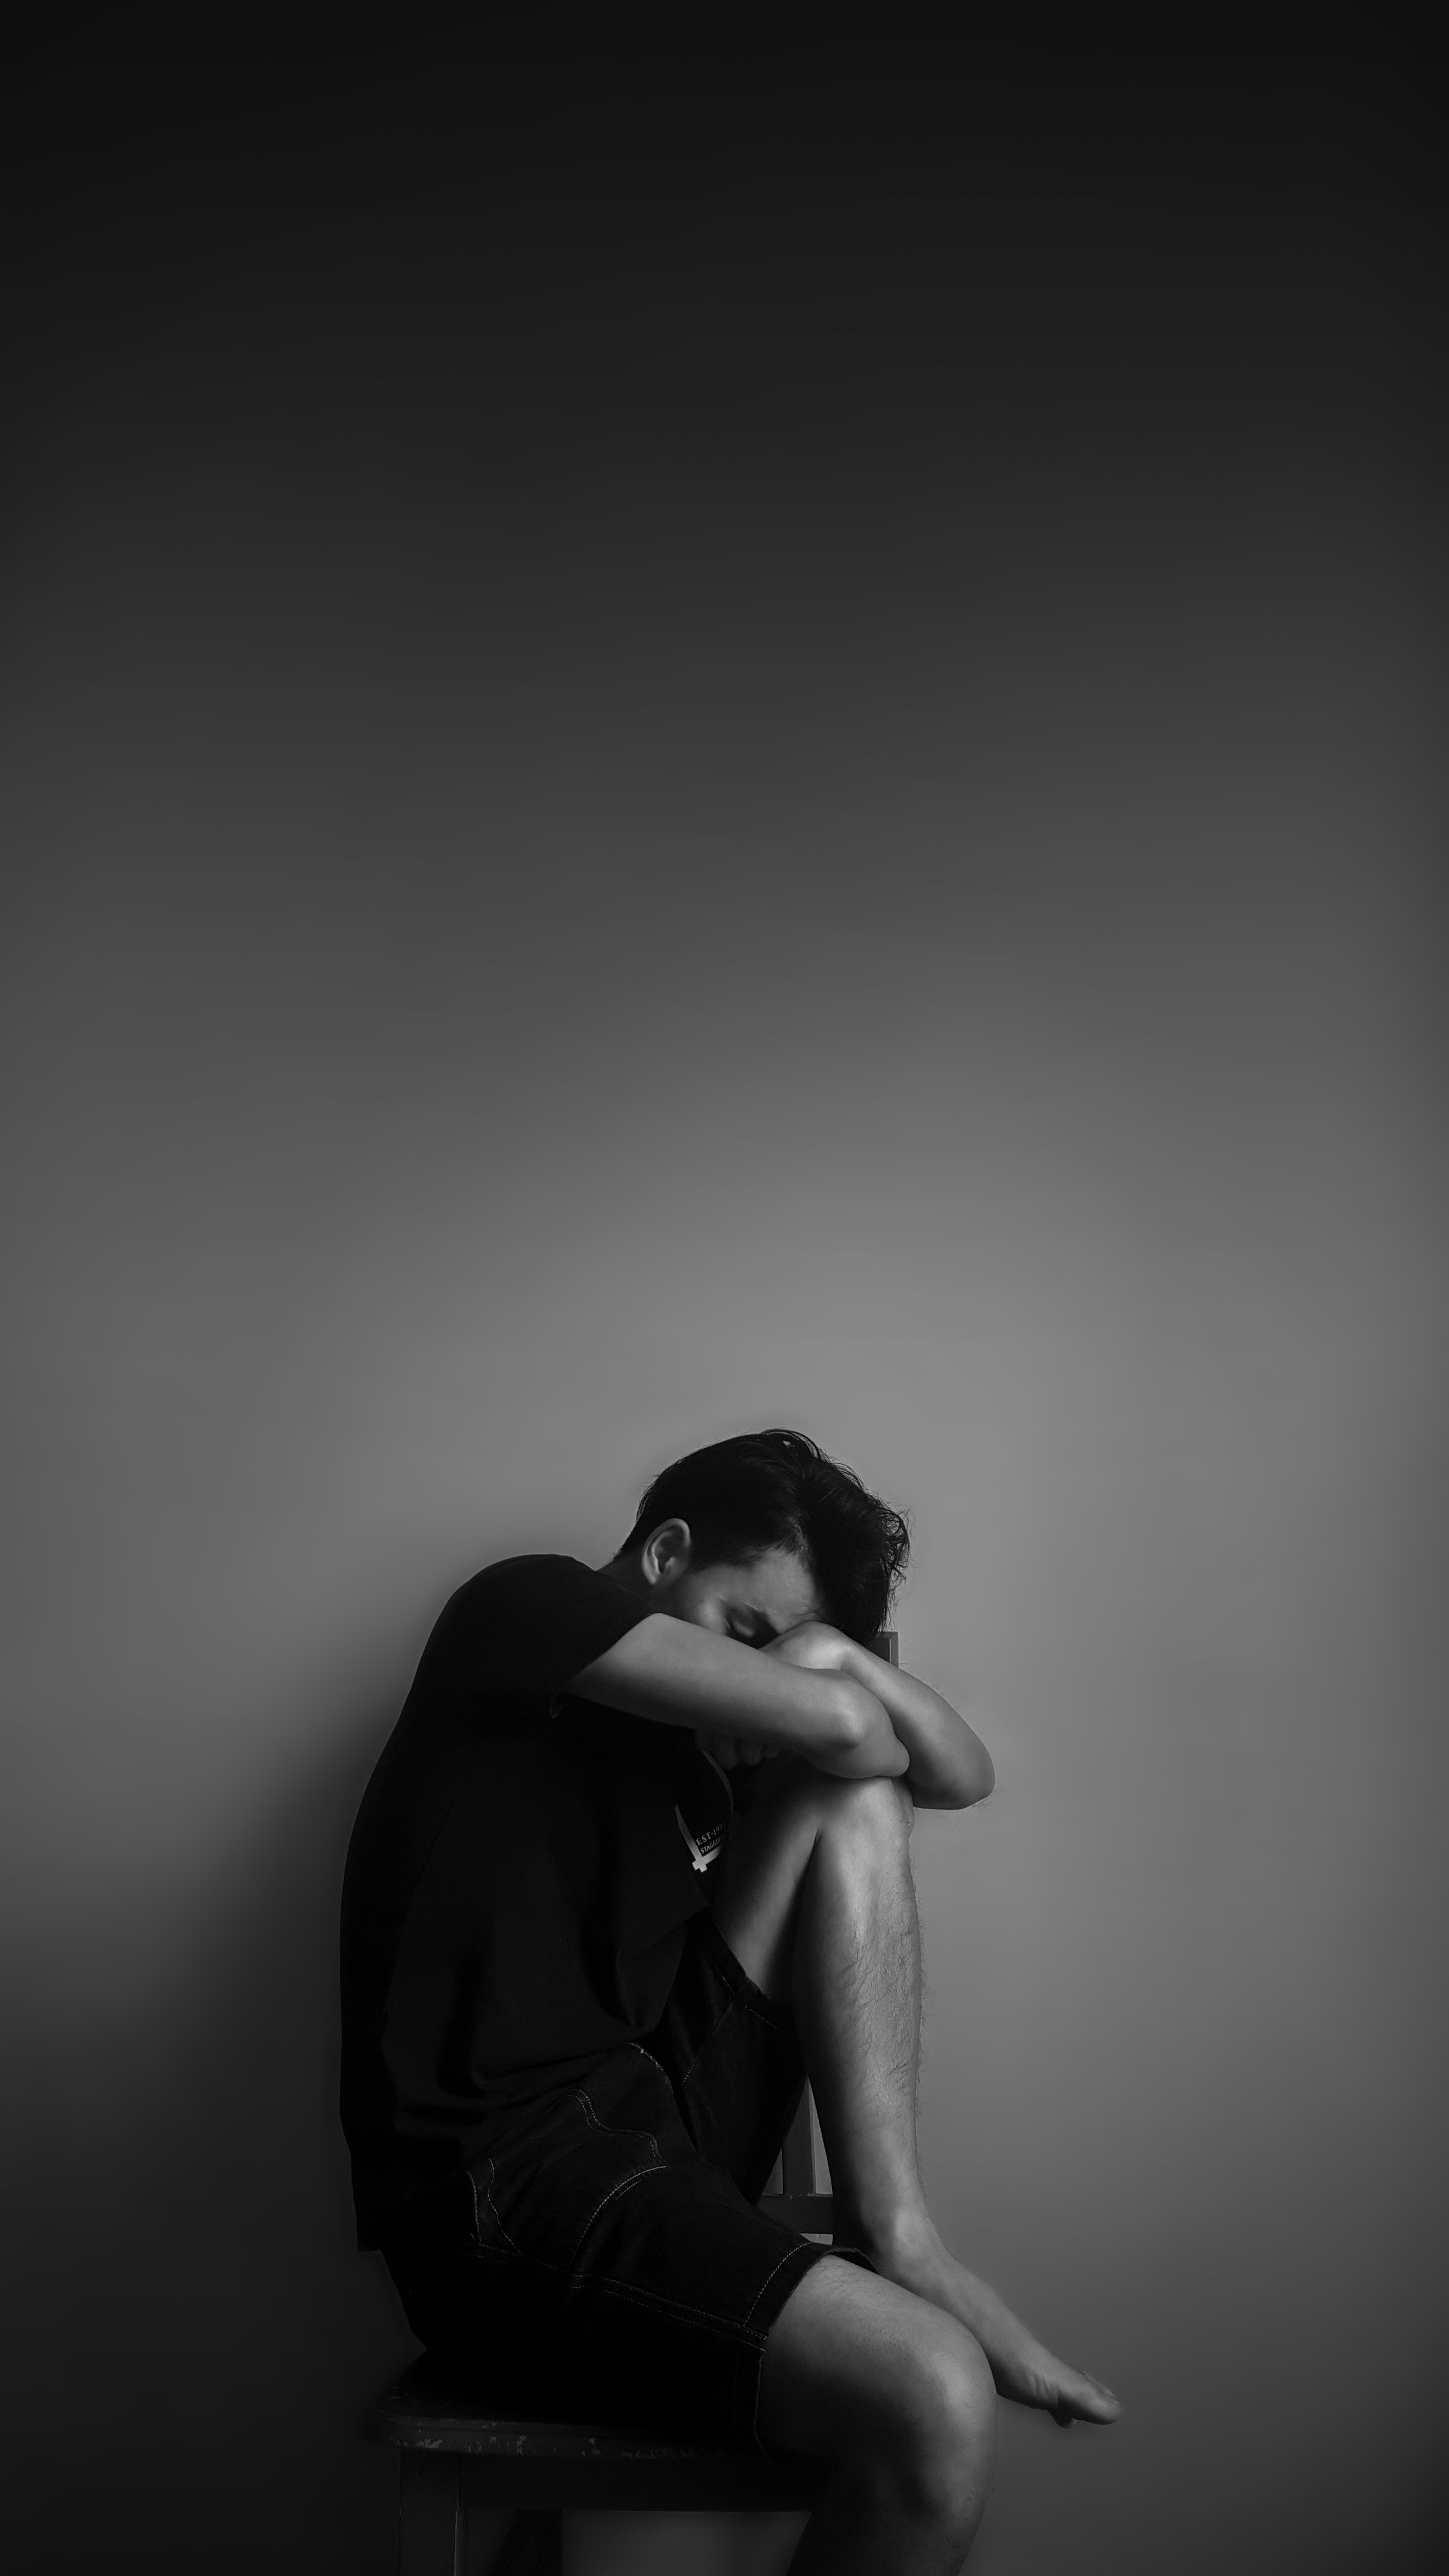 Grayscale photography of man sitting beside wall